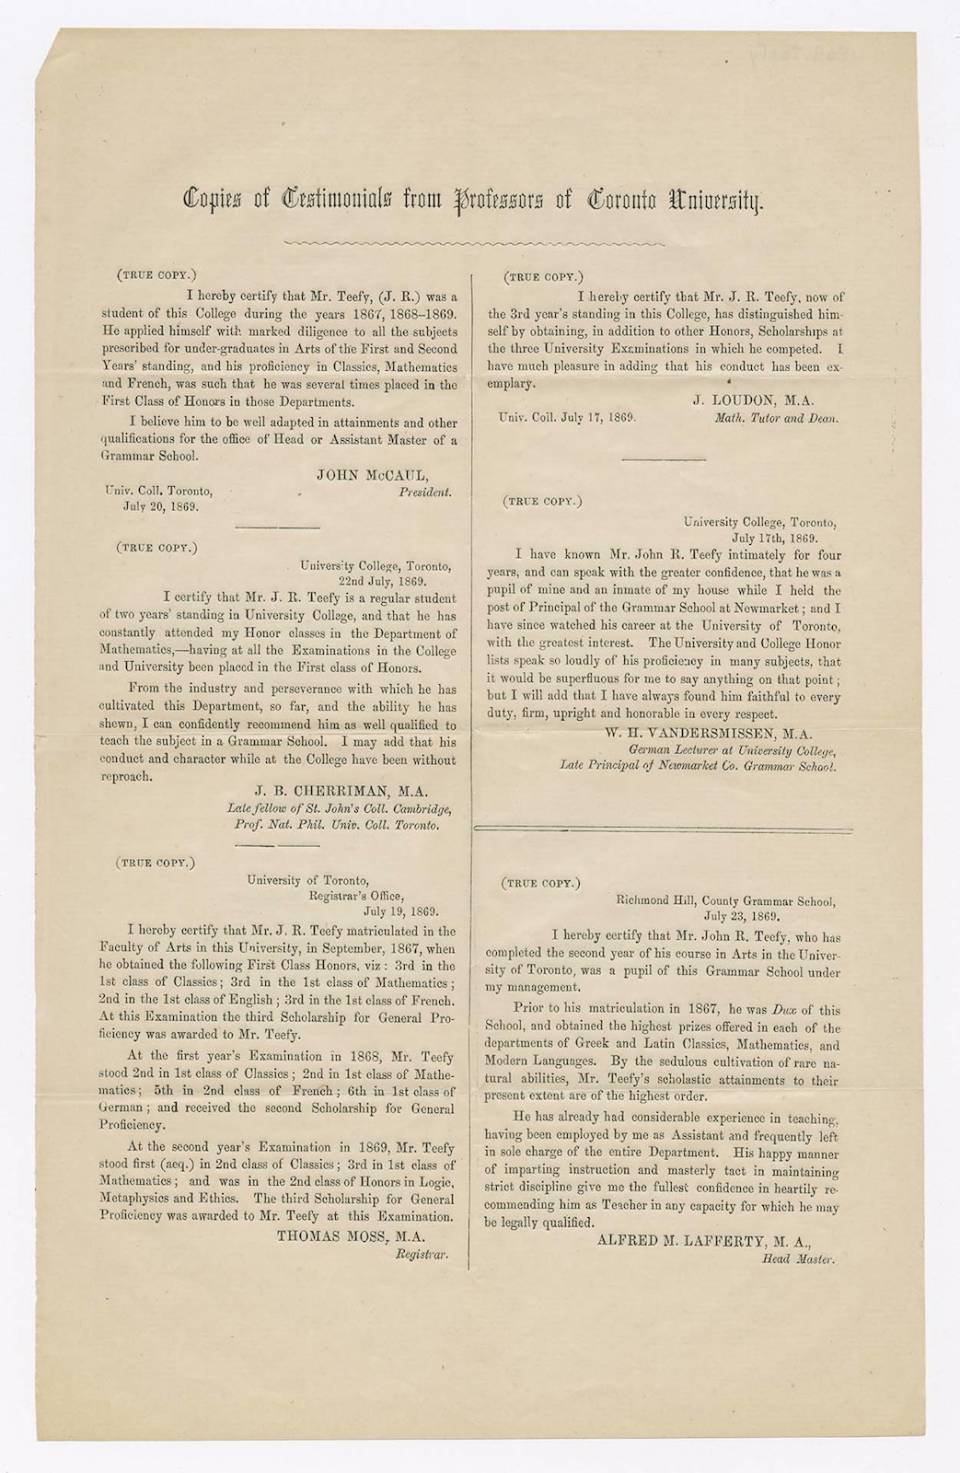 Page containing five letters of recommendation under the heading "Copies of Testimonials from professors of Toronto University"